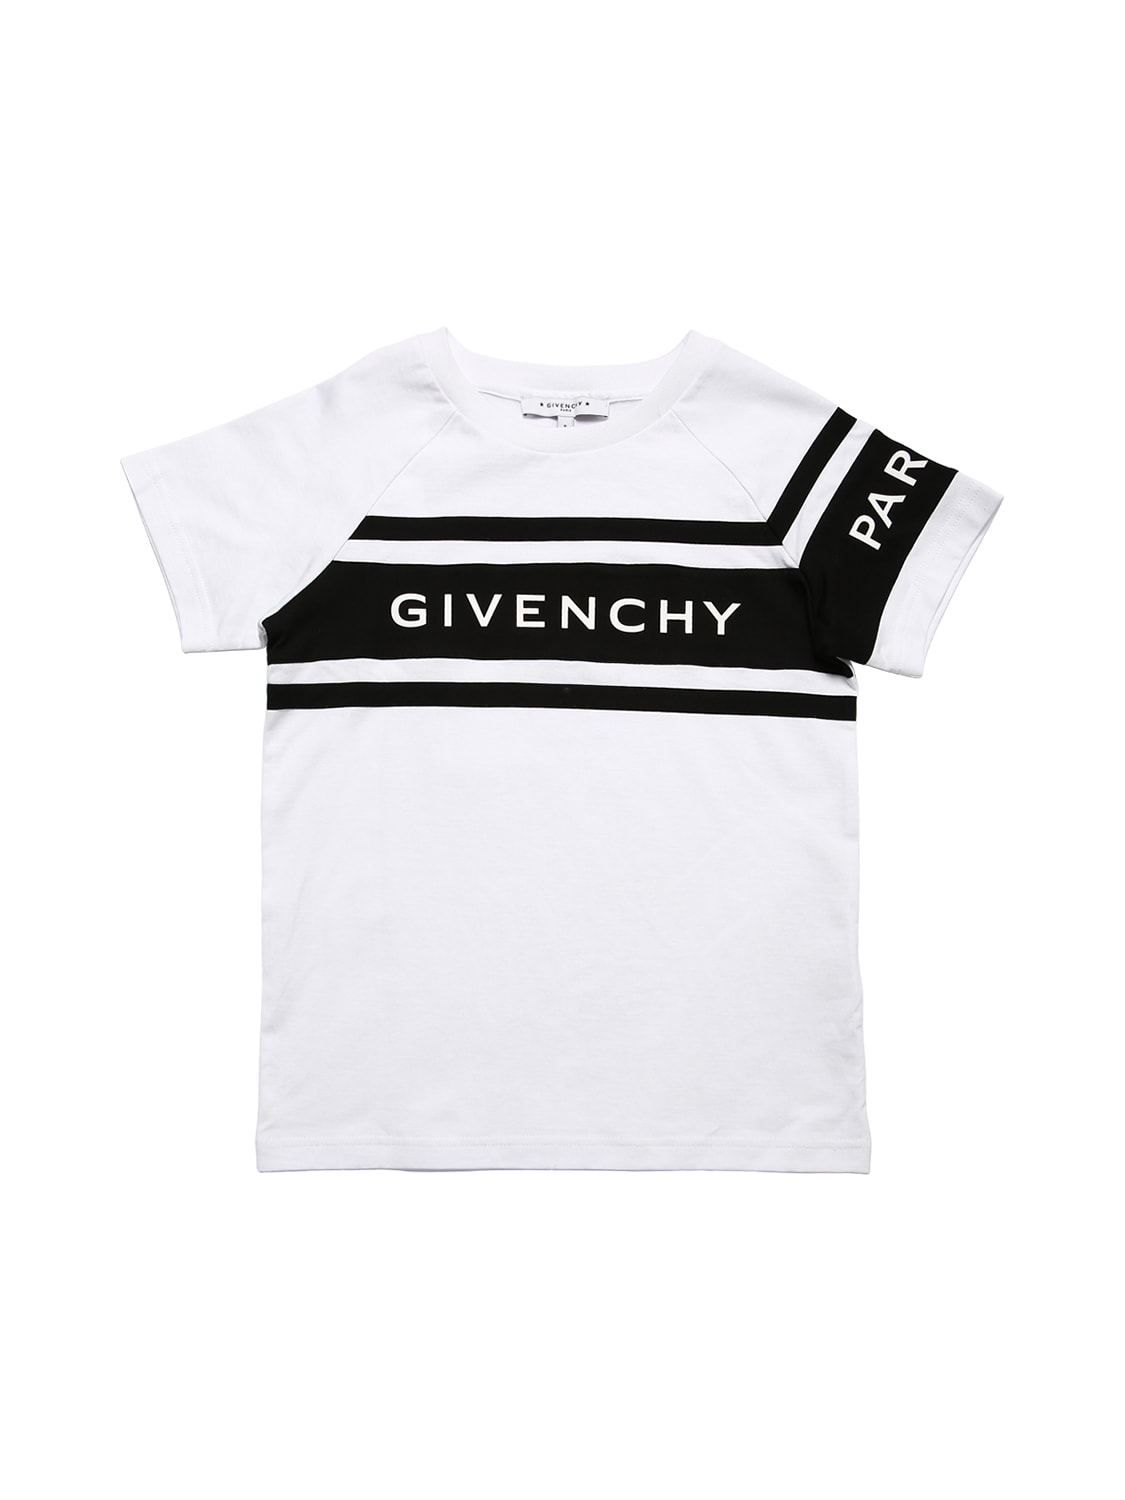 givenchy top kids